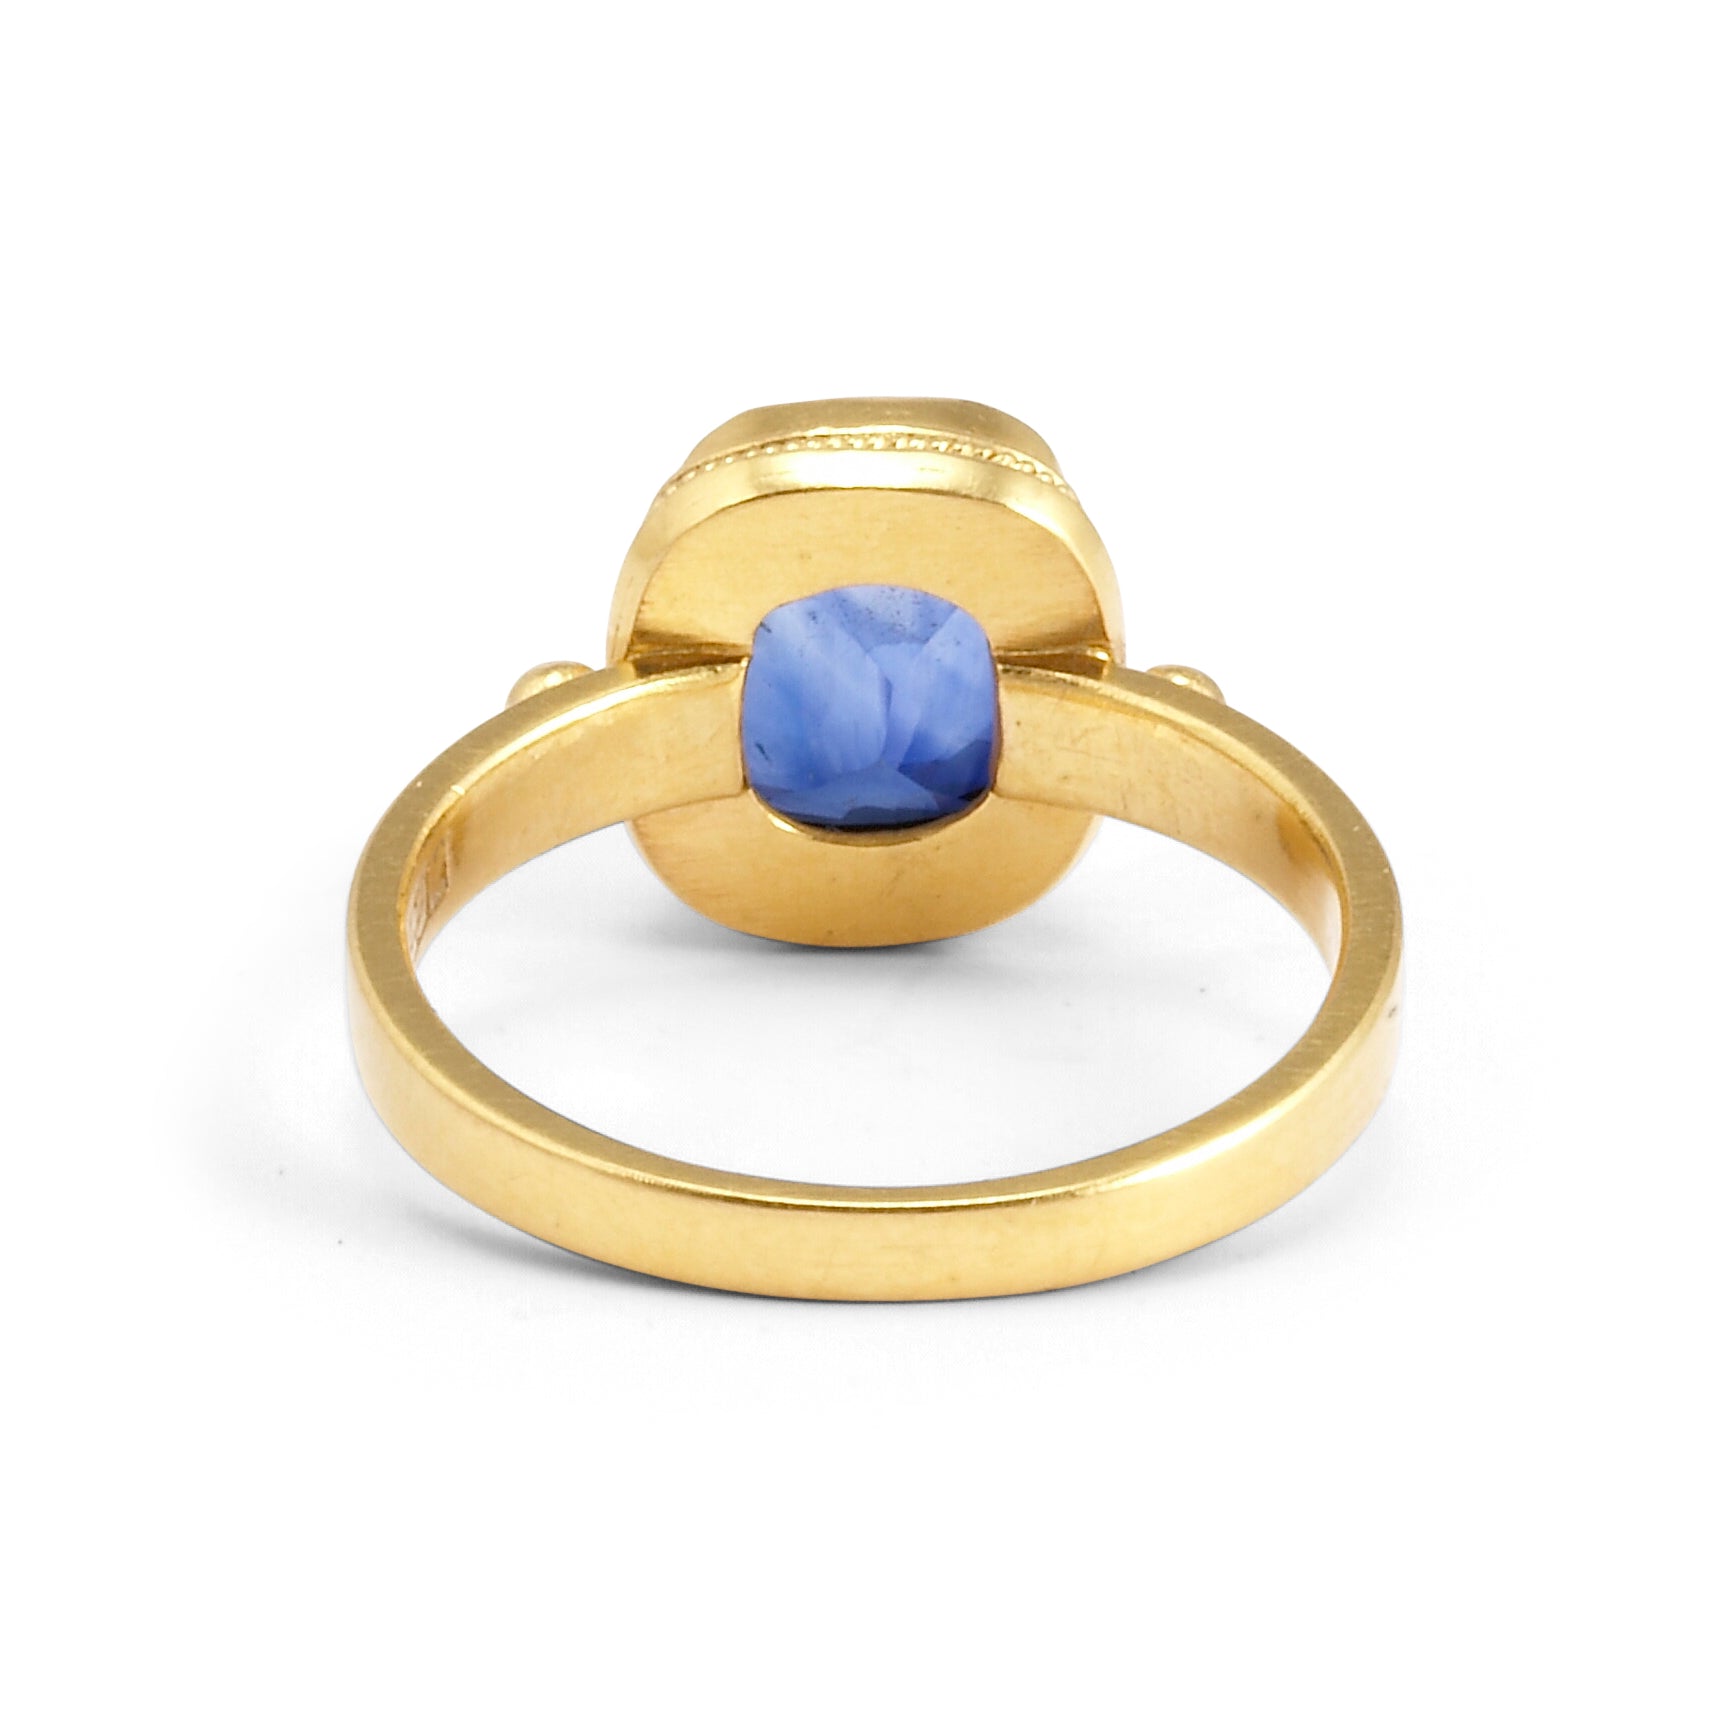 Blue Sapphire 3.59ct Faceted 22Kt Gold Handmade Ring - VO-335 - Crystalarium